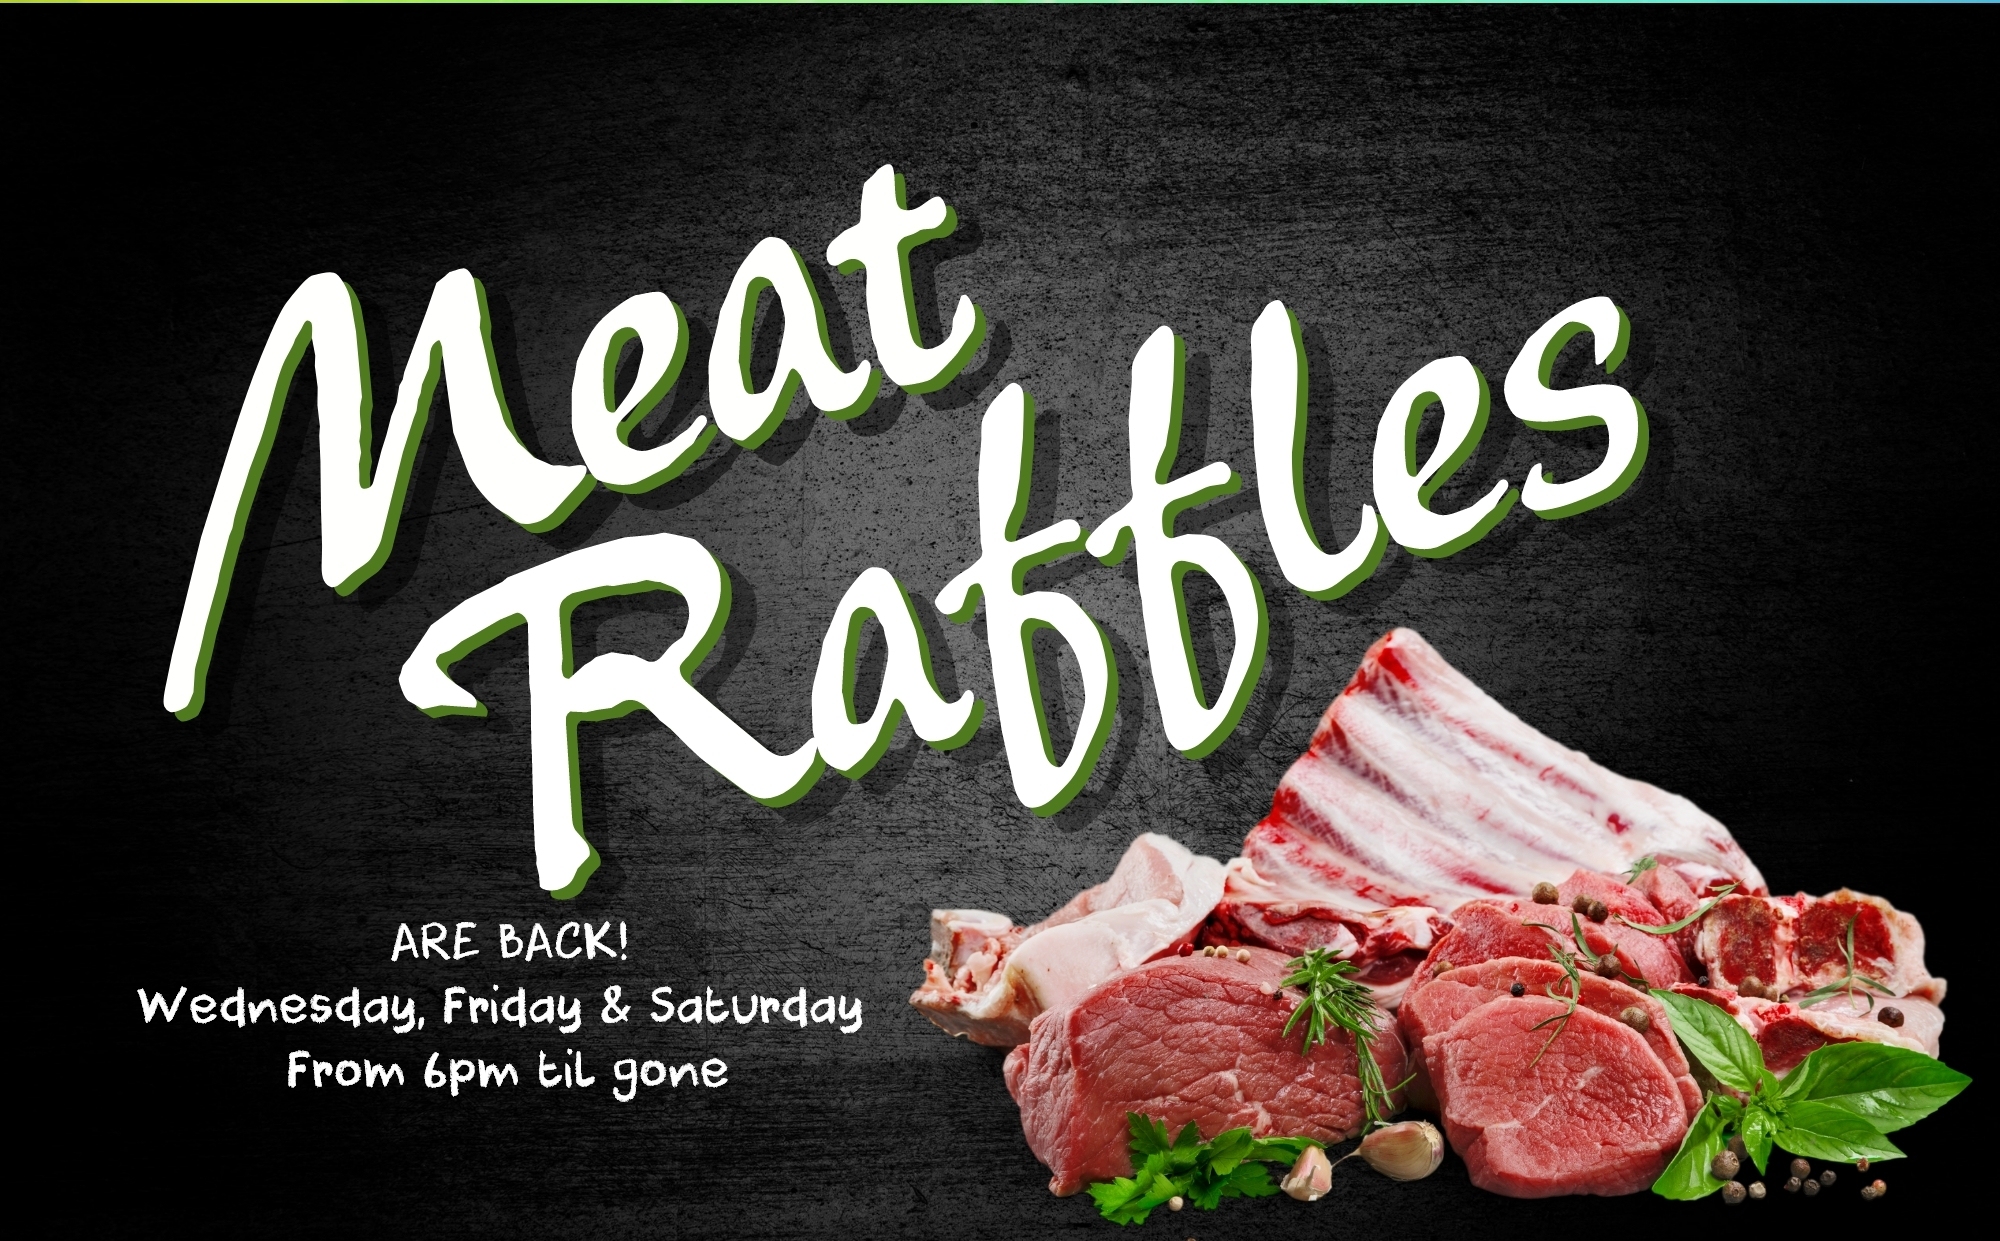 MEAT RAFFLES are back